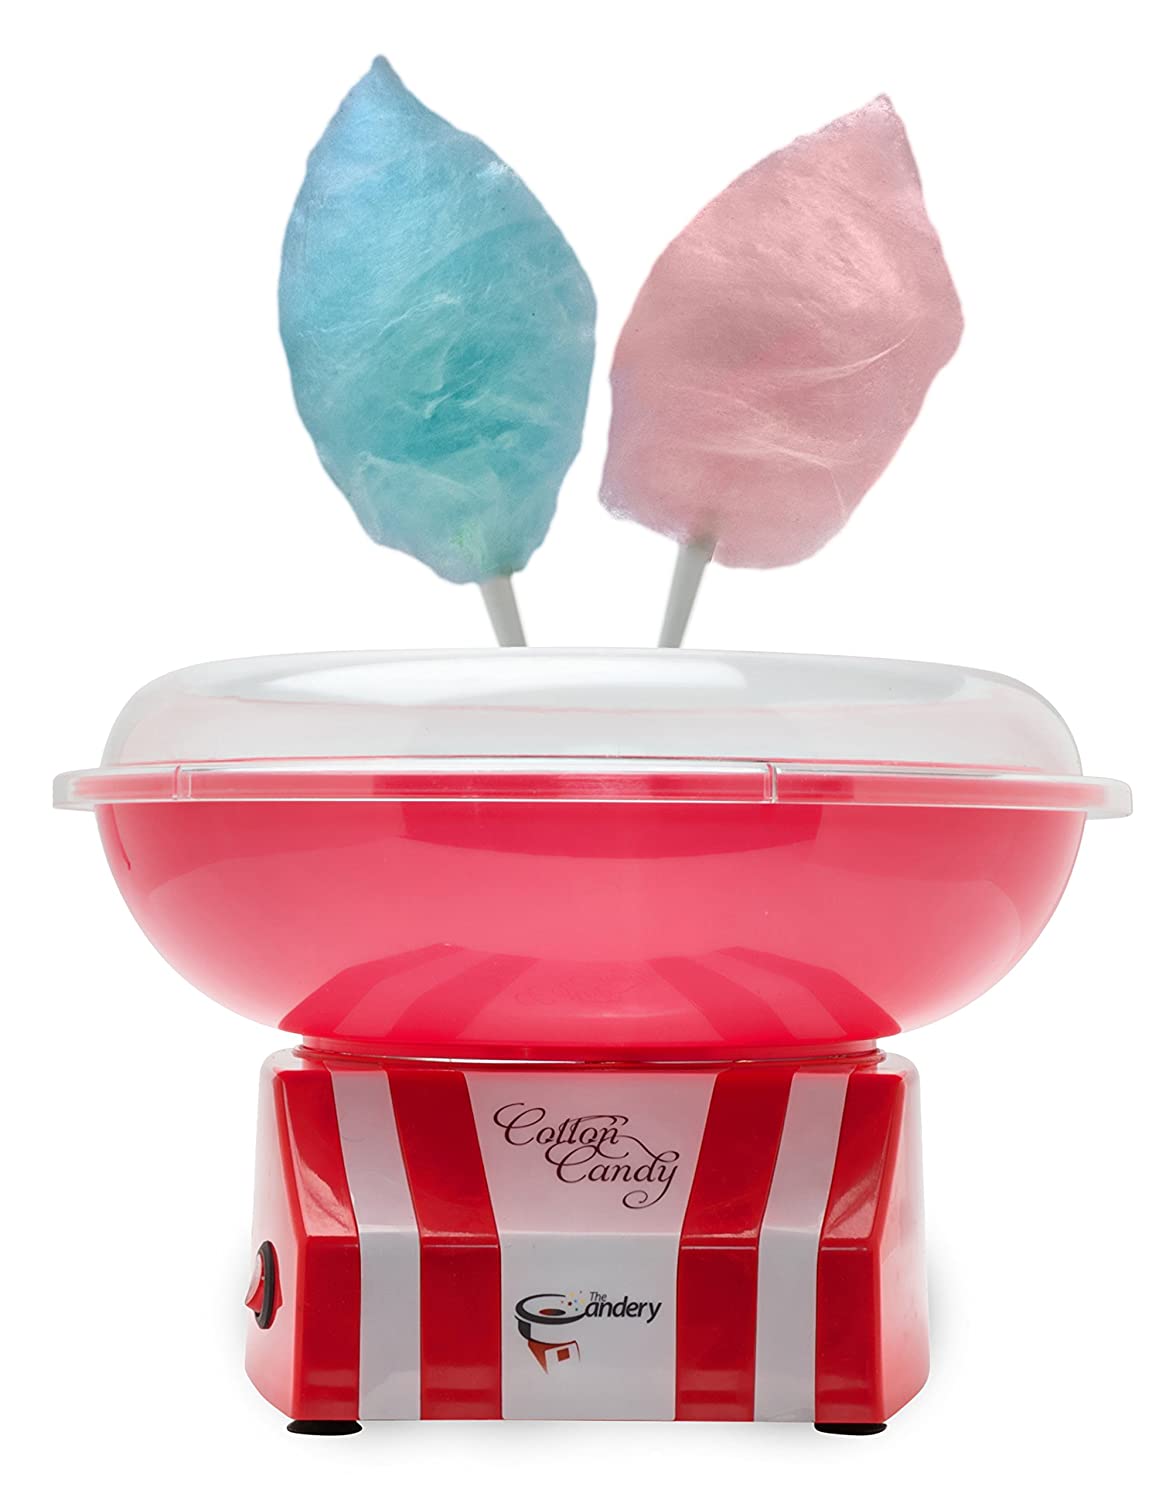 The Candery Cotton Candy Machine - Bright, Colorful Style- Makes Hard Candy, Sugar Free Candy, Sugar Floss, Homemade Sweets for Birthday Parties - Includes 10 Candy Cones & Scooper